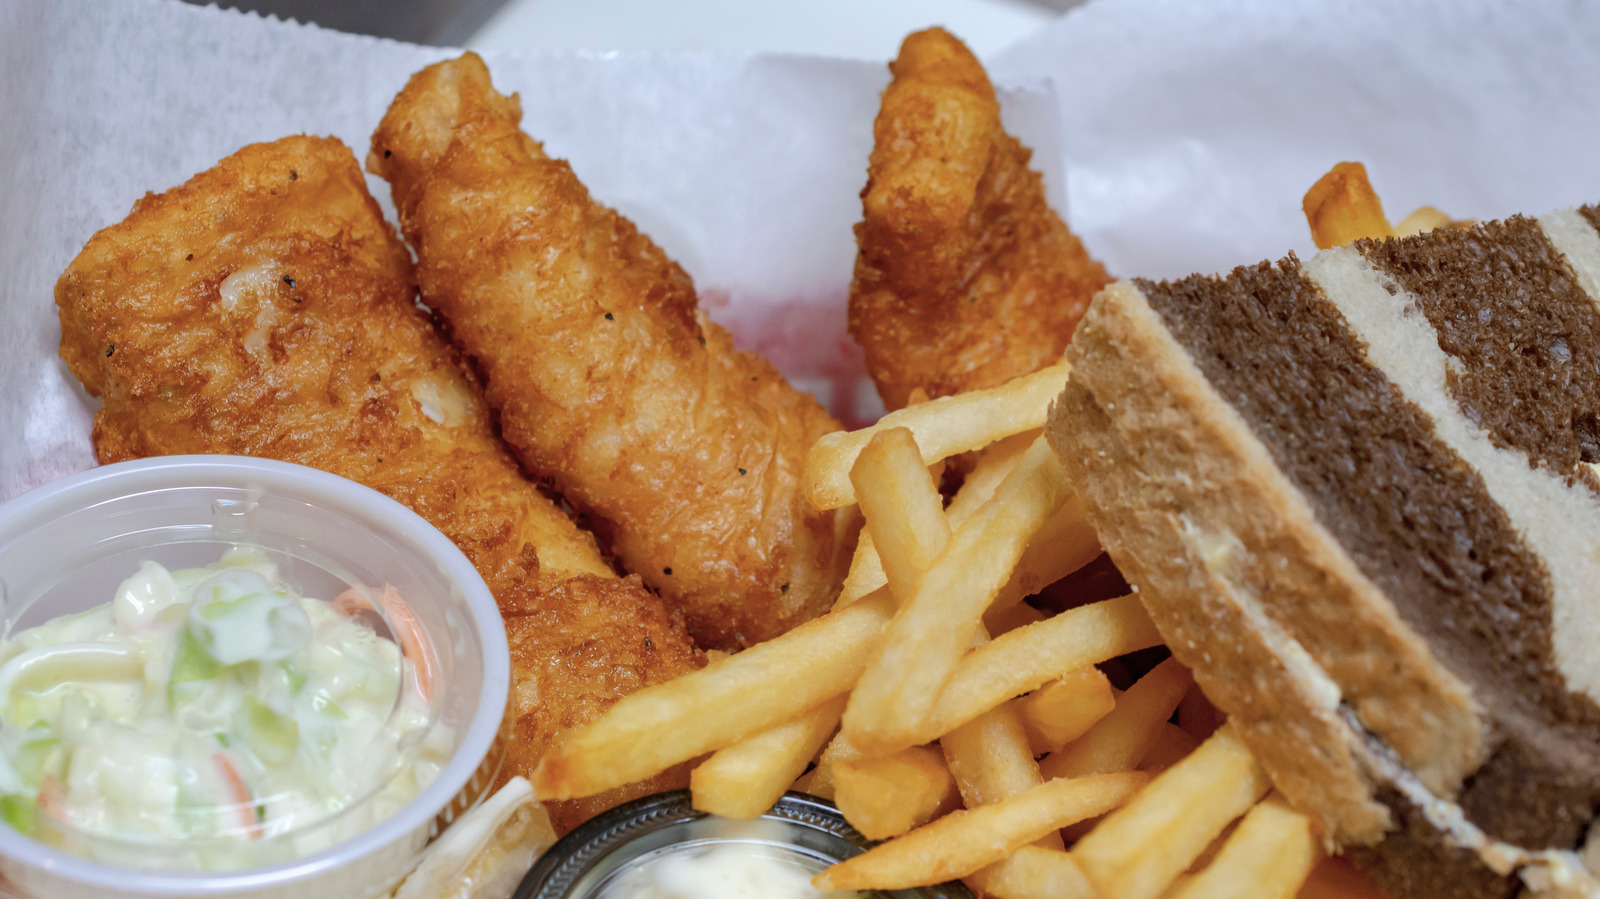 Why The Friday Fish Fry Became A Wisconsin Tradition